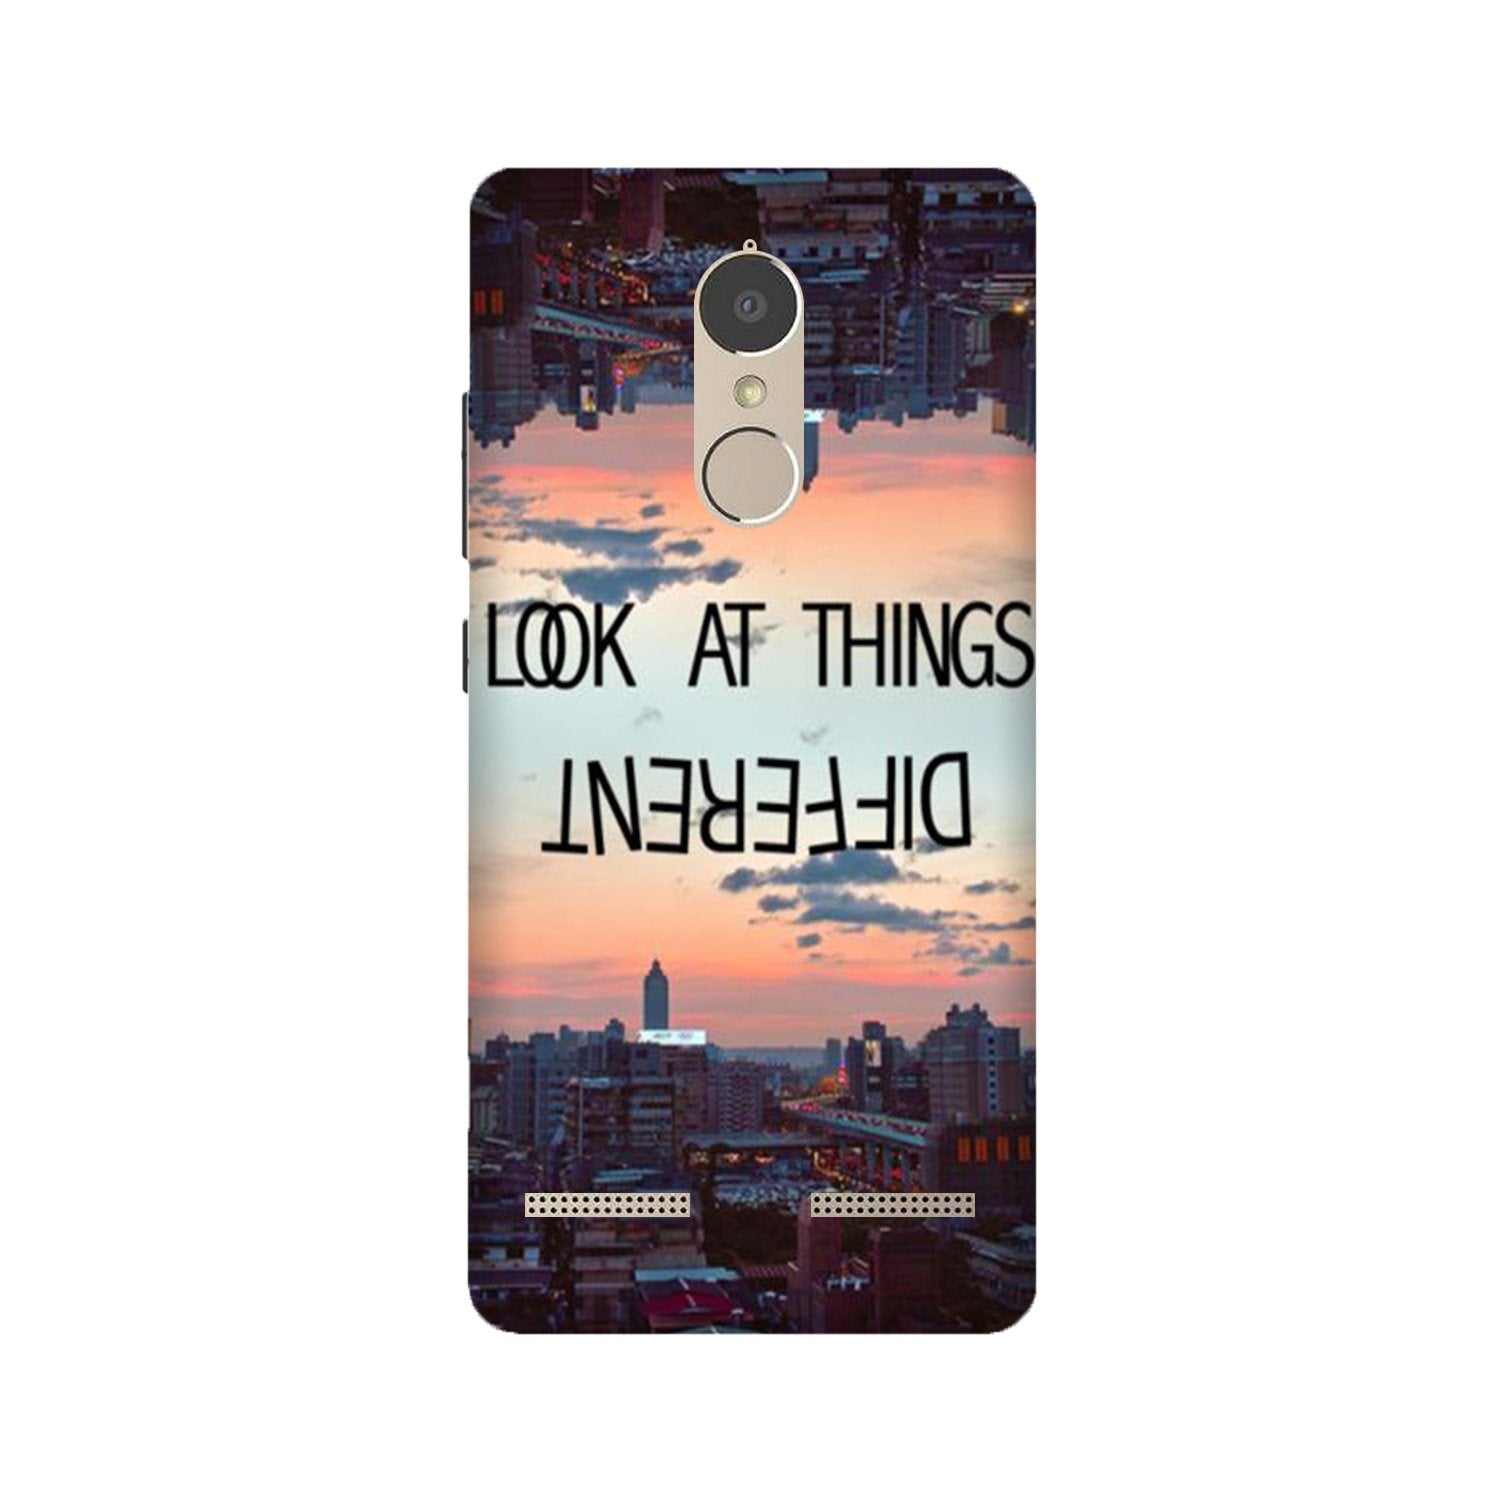 Look at things different Case for Lenovo K6 / K6 Power